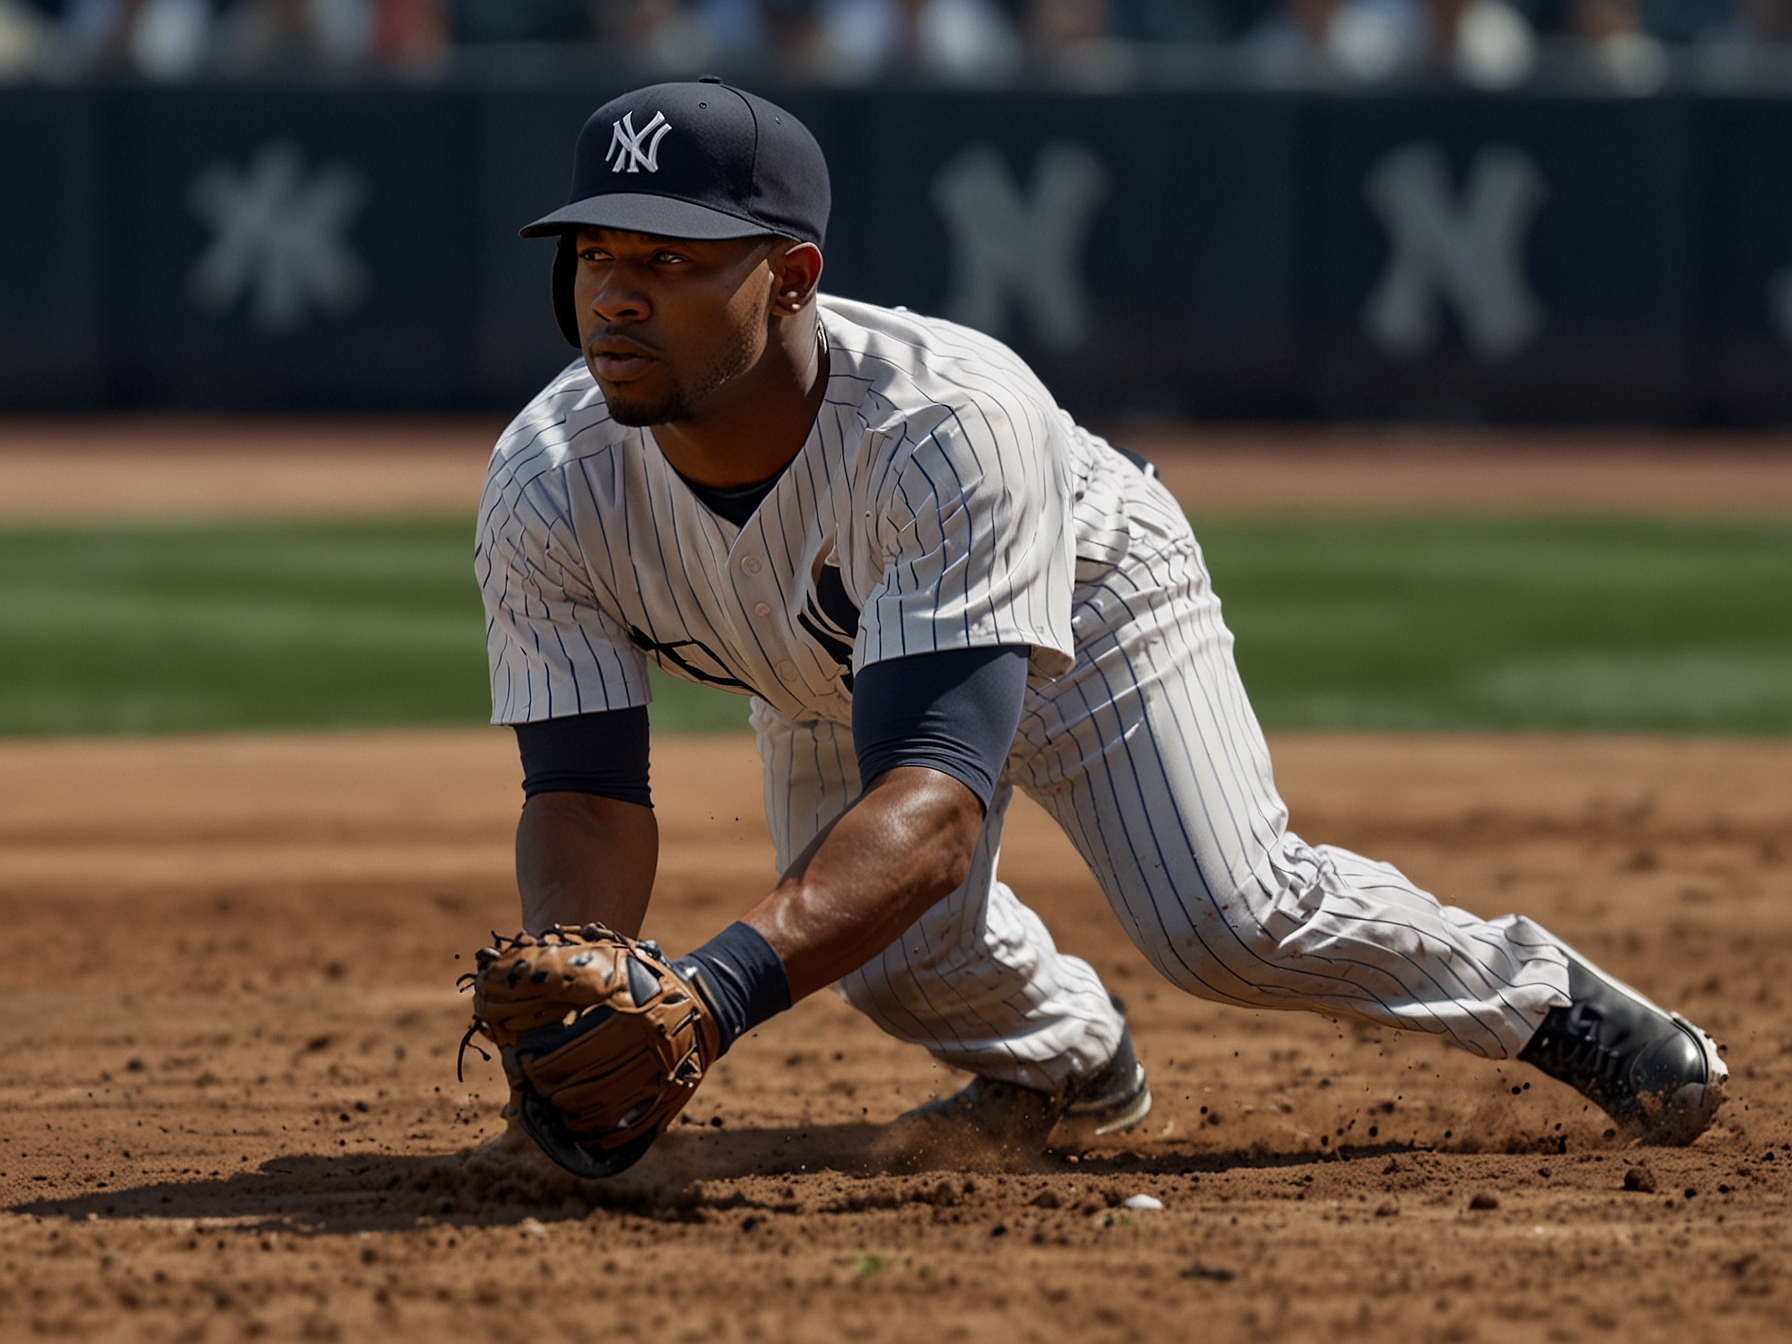 A close-up image of a determined Yankees second baseman fielding a ground ball, representing the team's relief in avoiding a major injury but emphasizing the need for more dependable infield support.